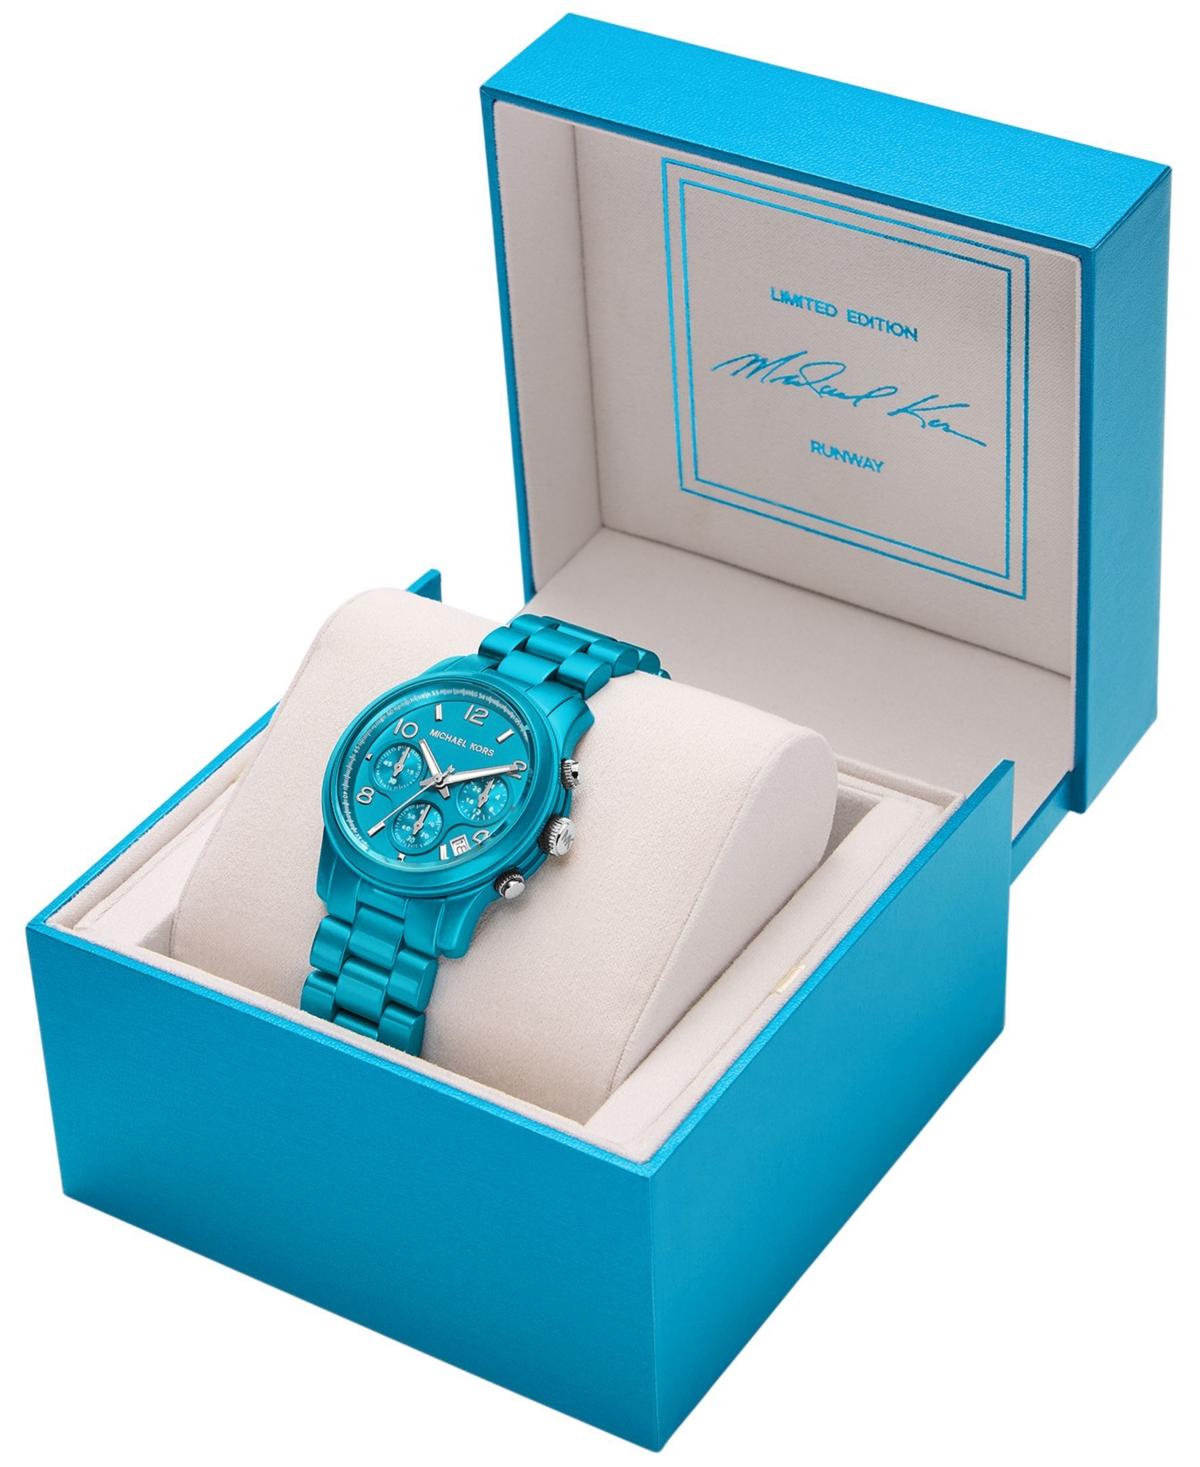 Michael Kors Limited Edition Runway Chronograph Stainless Steel Watch 38mm  in Blue | Lyst | Quarzuhren